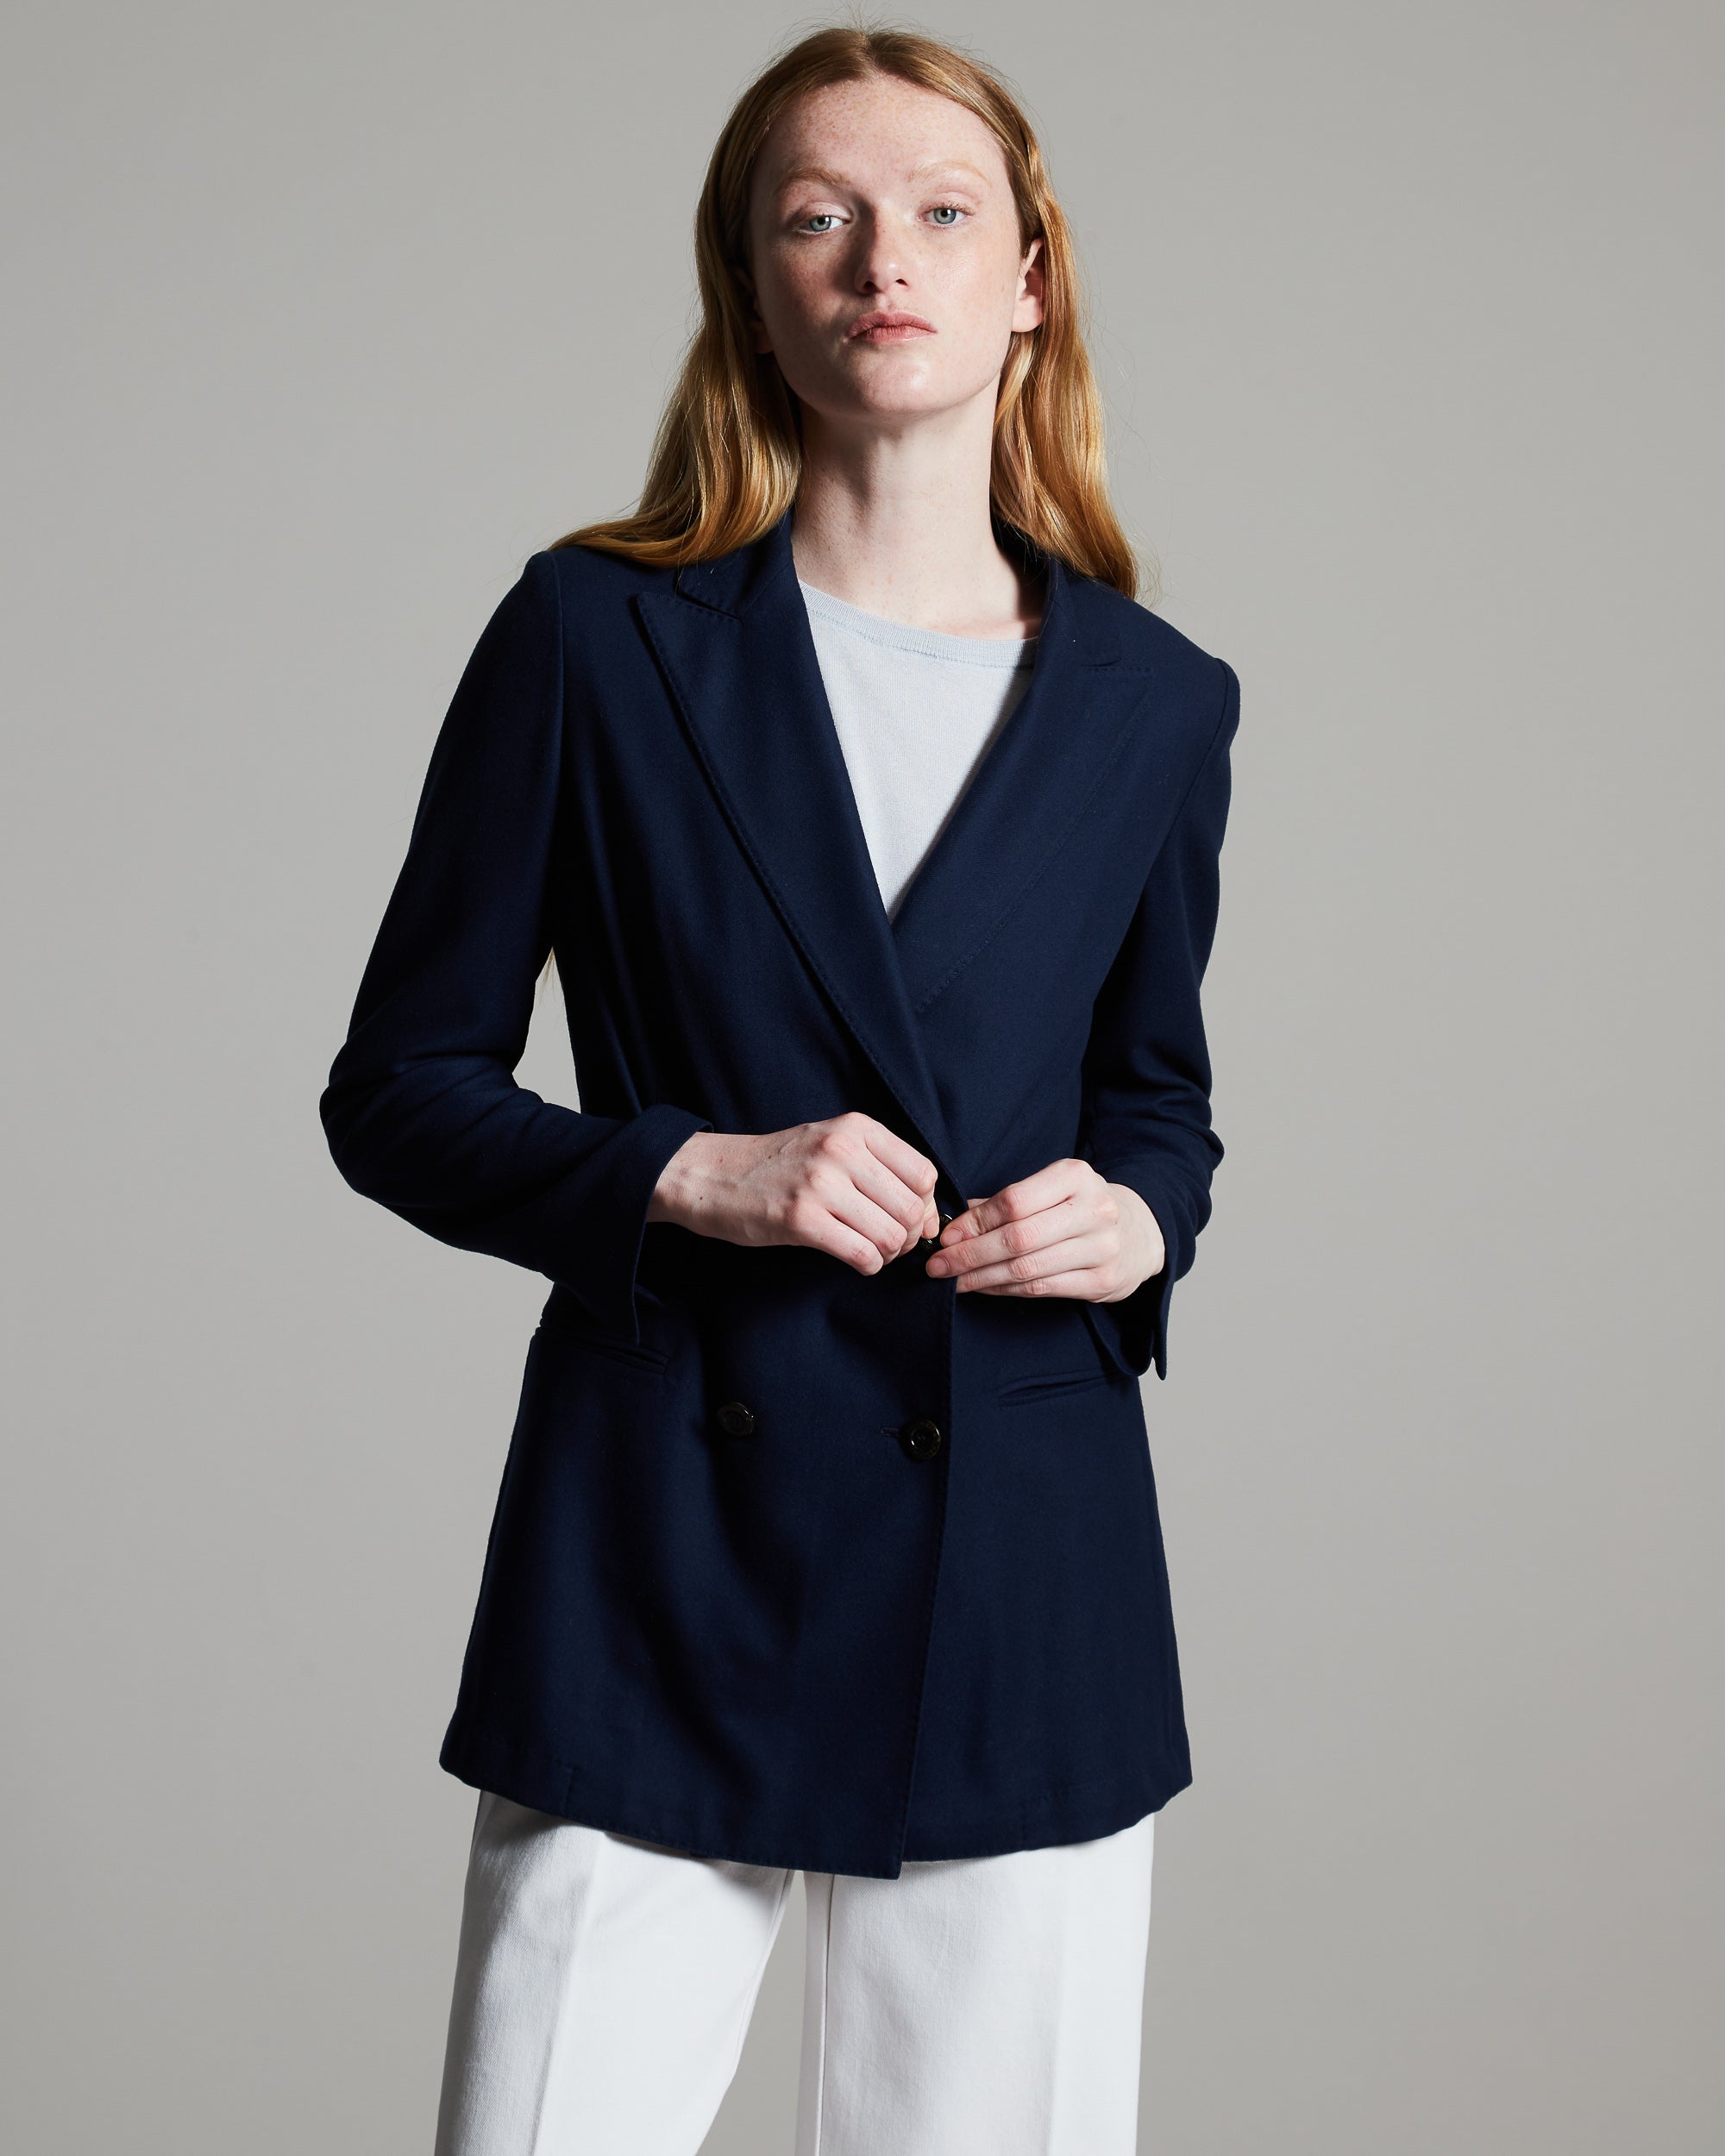 12.8 Kid Wool double breasted blazer in navy